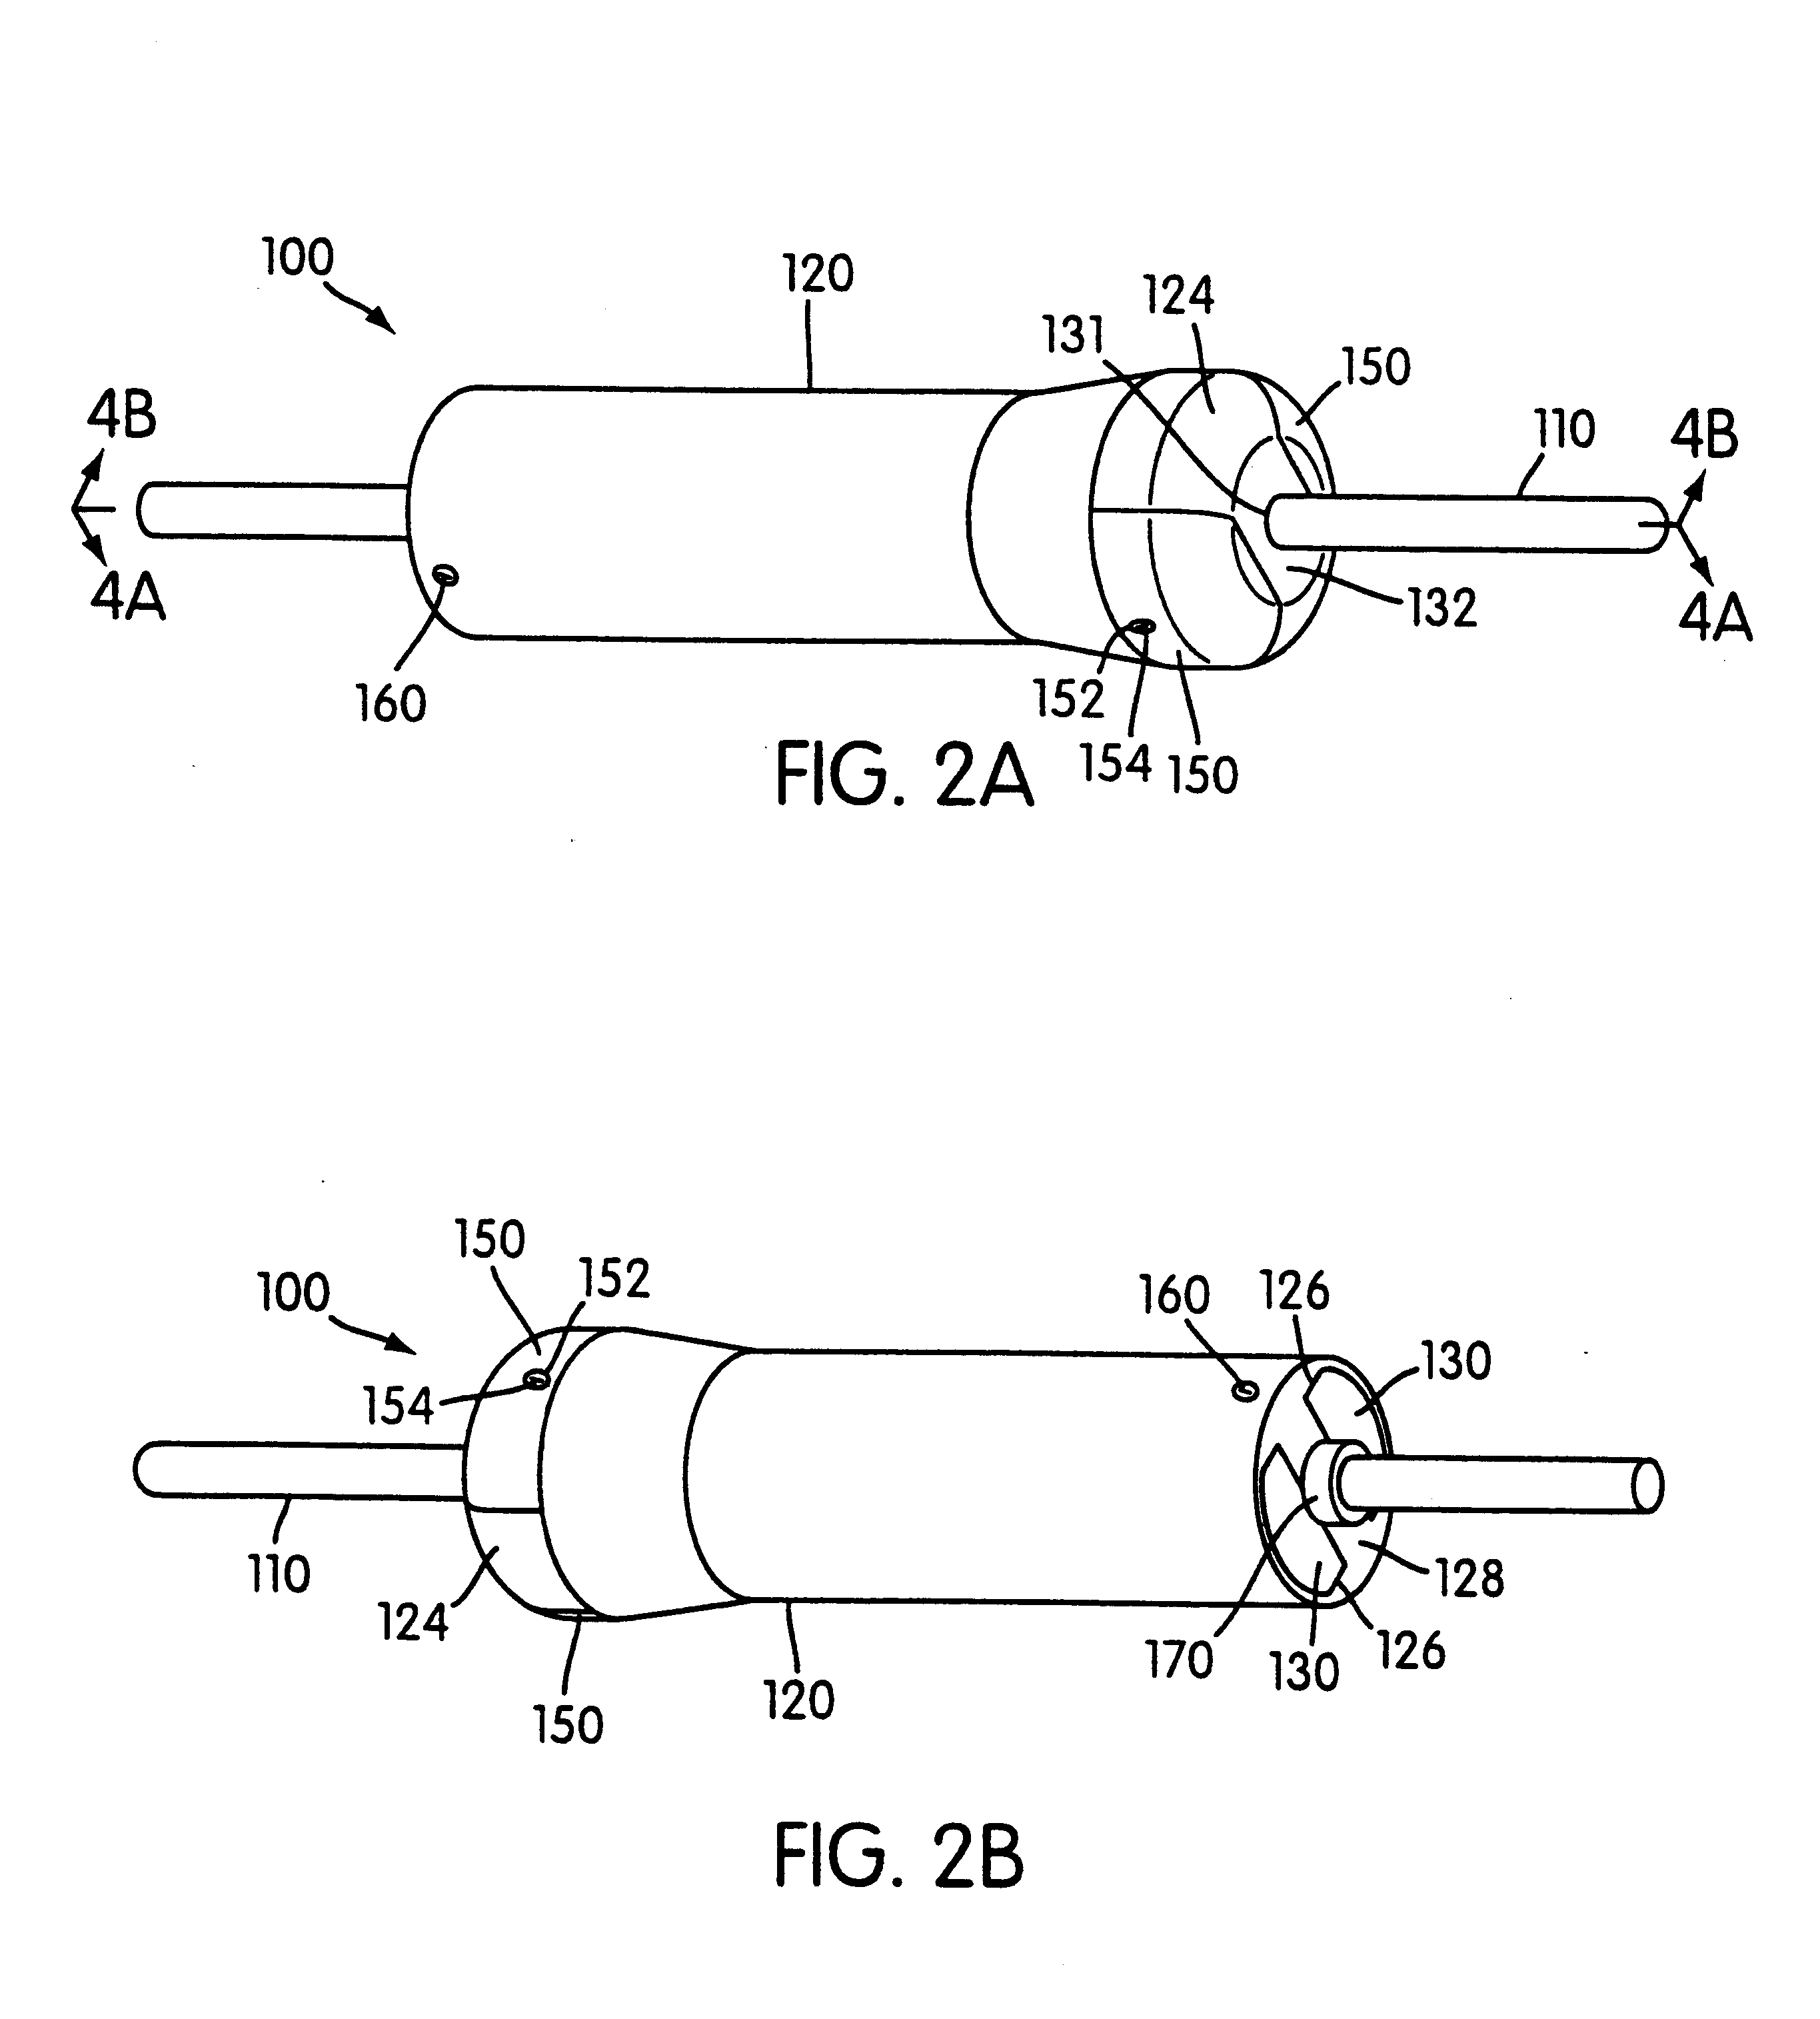 Multicomponent vaginal cylinder system for low dose rate brachytherapy or gynecological cancers